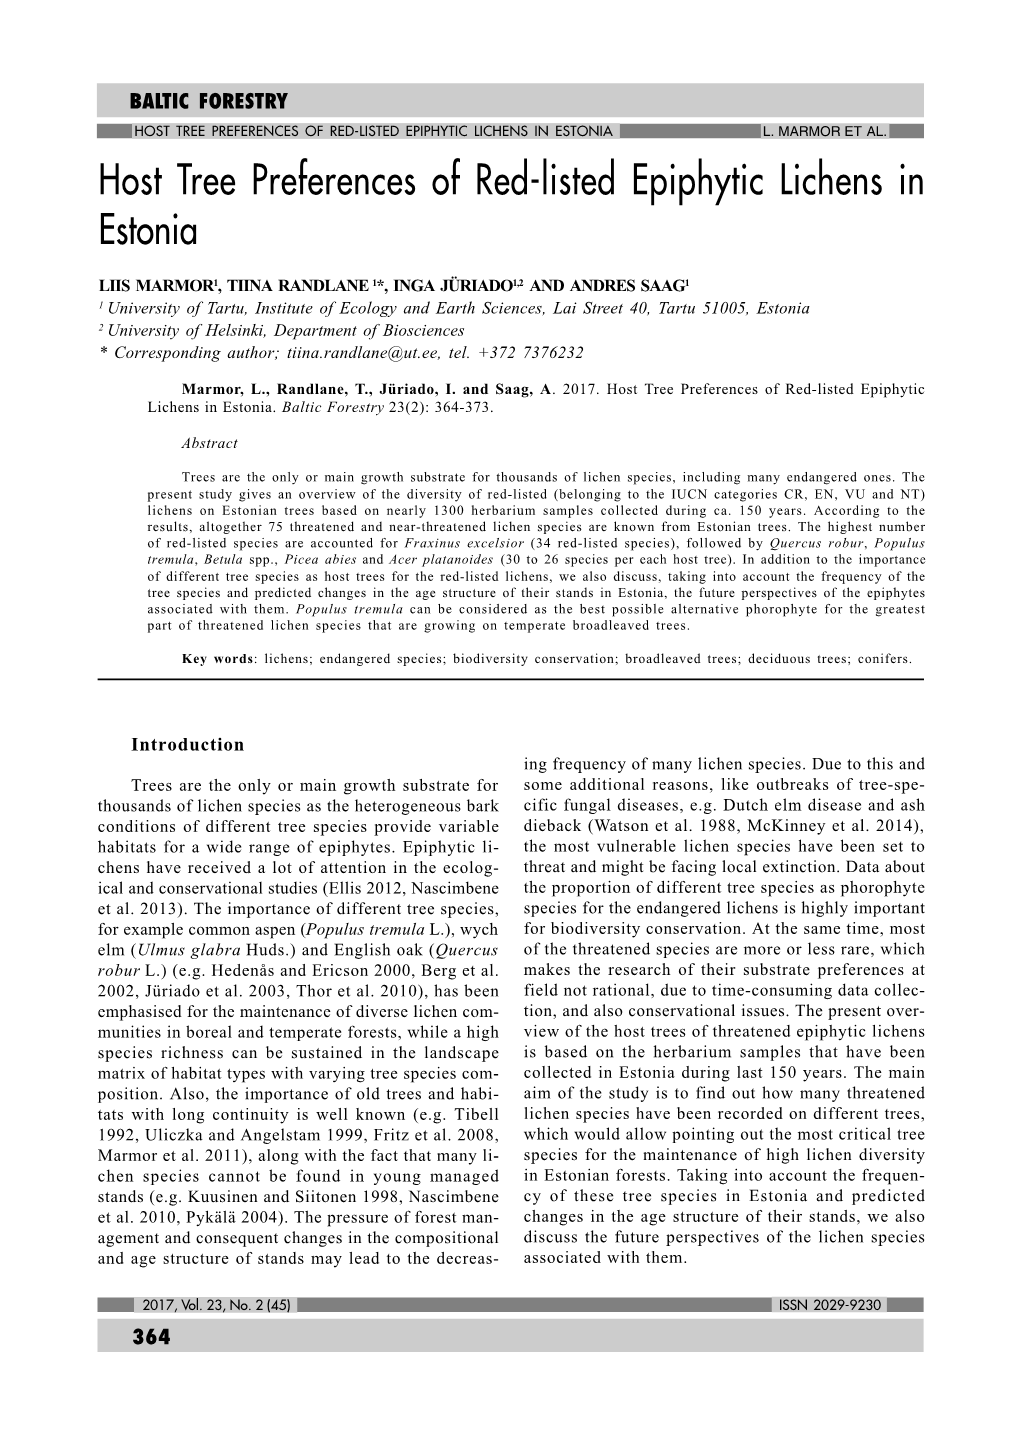 Host Tree Preferences of Red-Listed Epiphytic Lichens in Estonia L